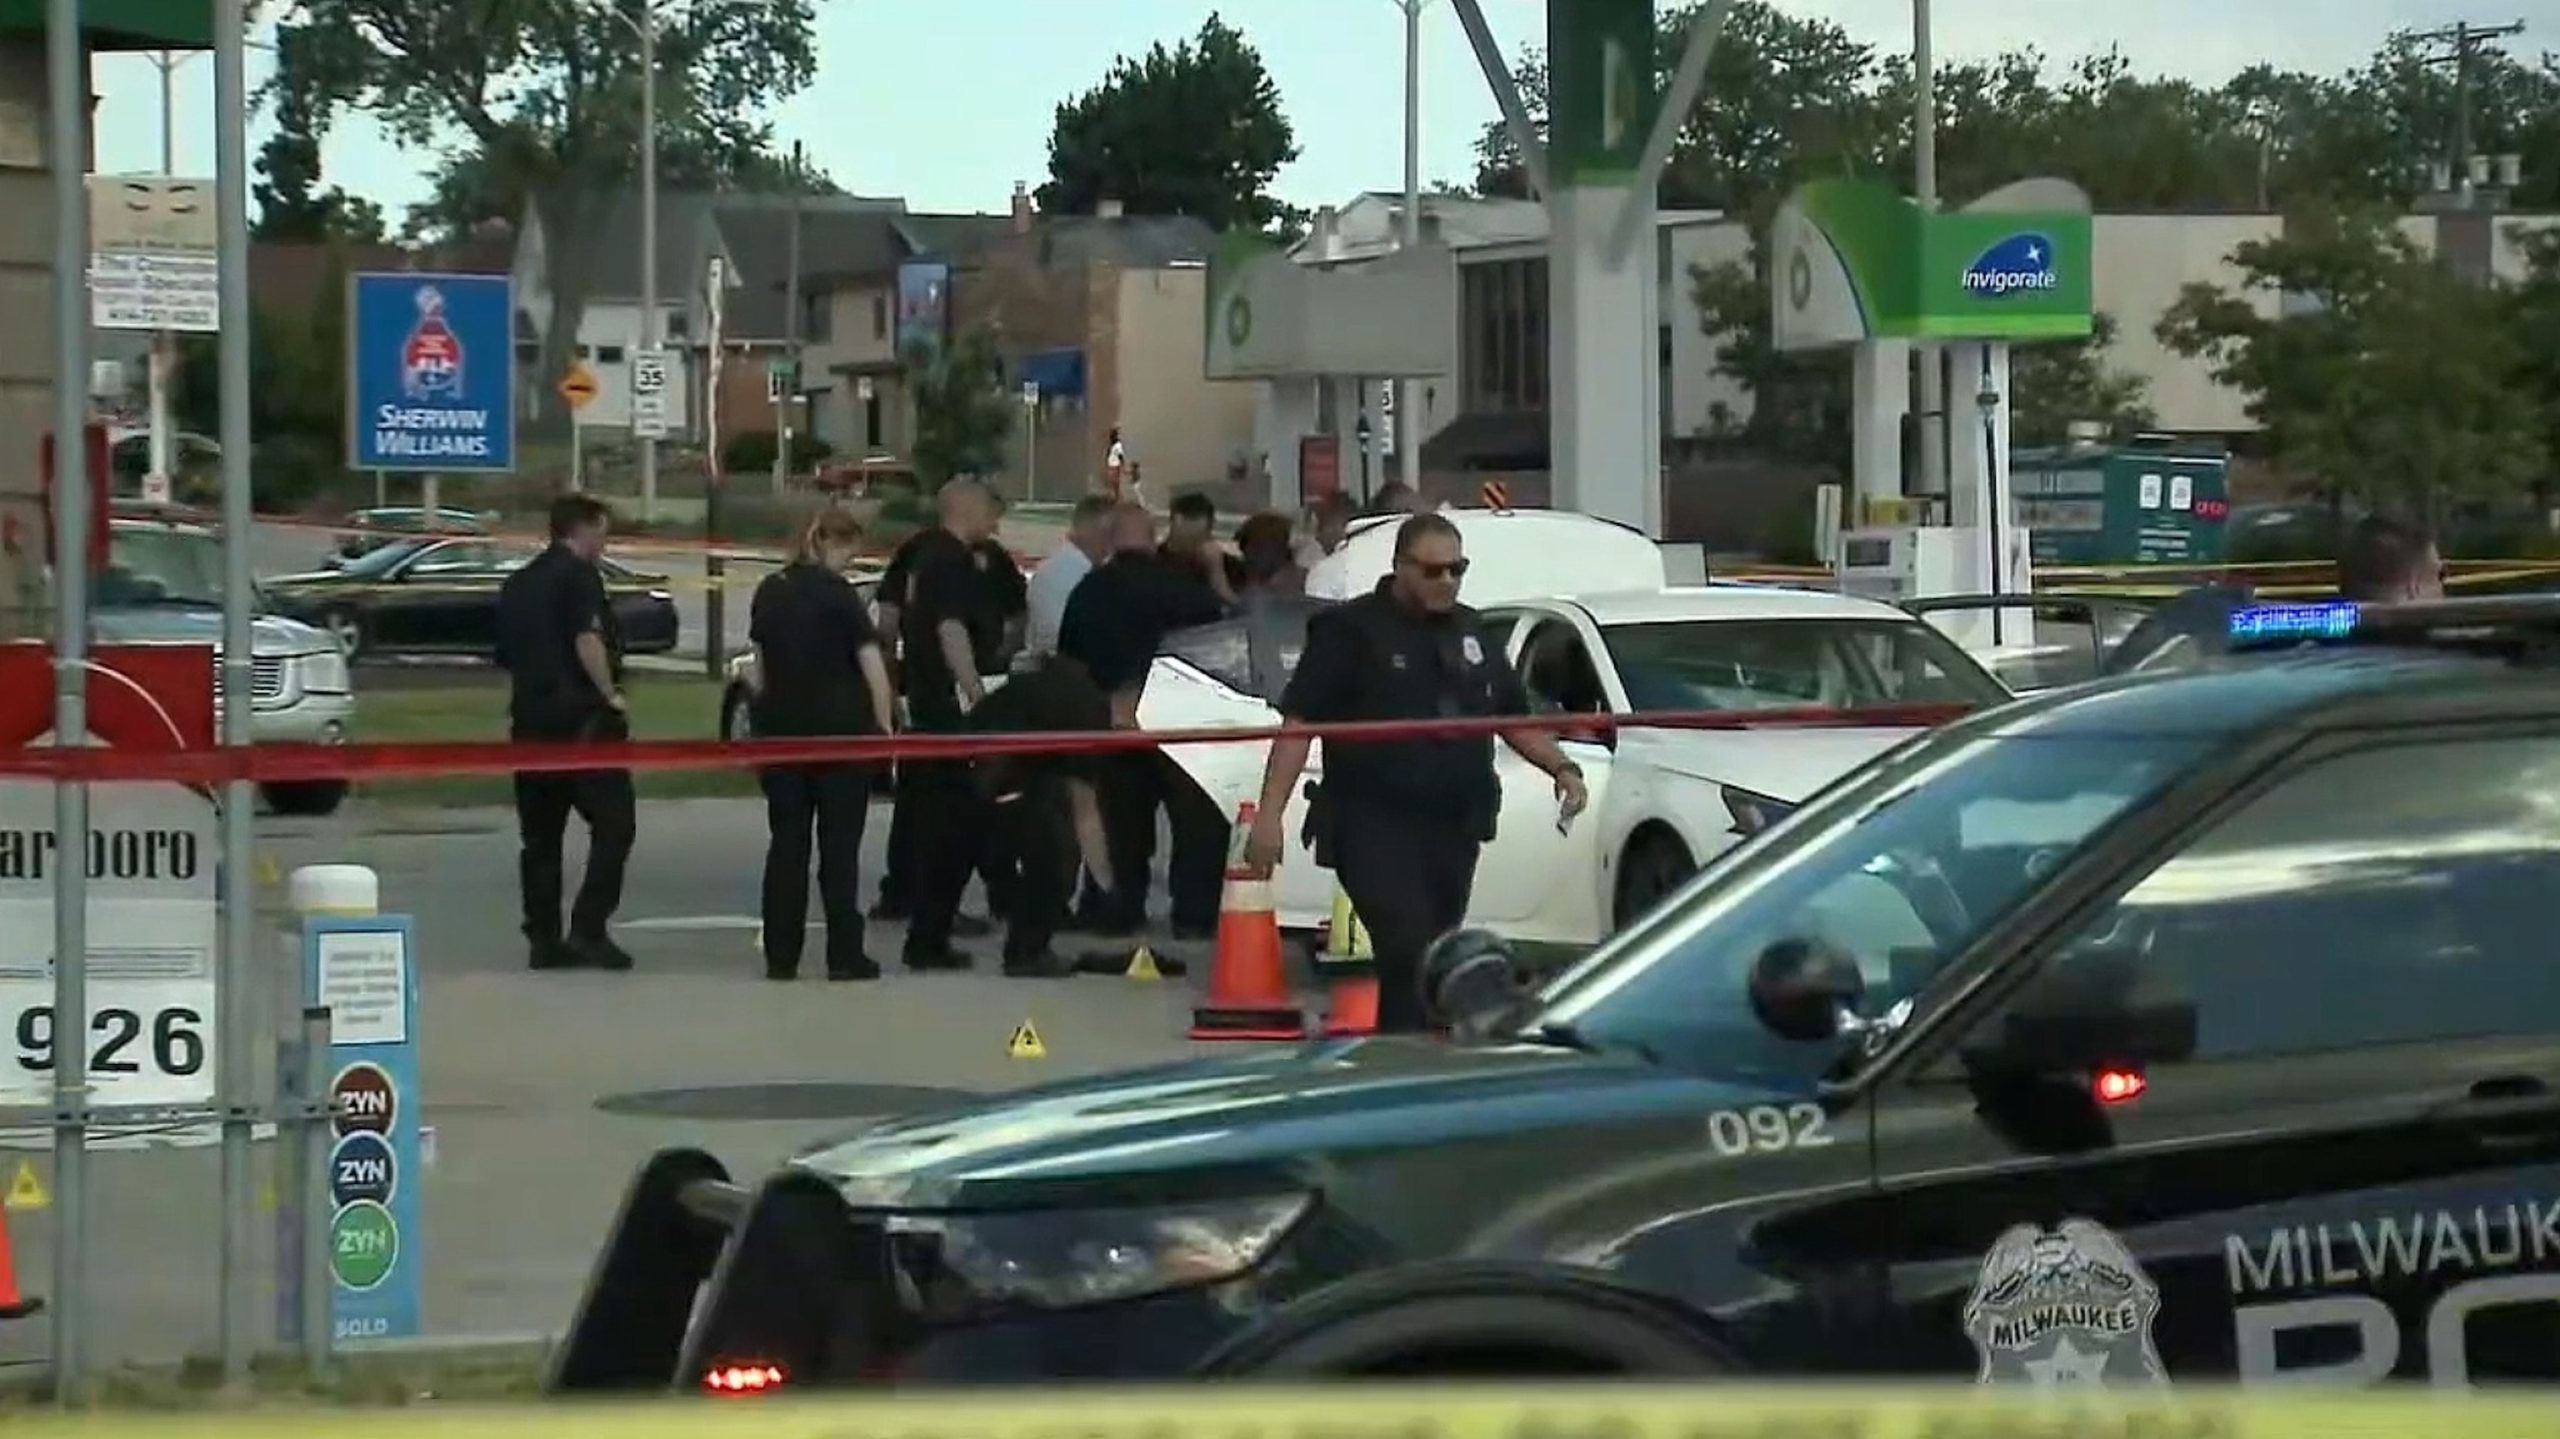 Shooting at Milwaukee gas station leaves 4 injured, including 2 children